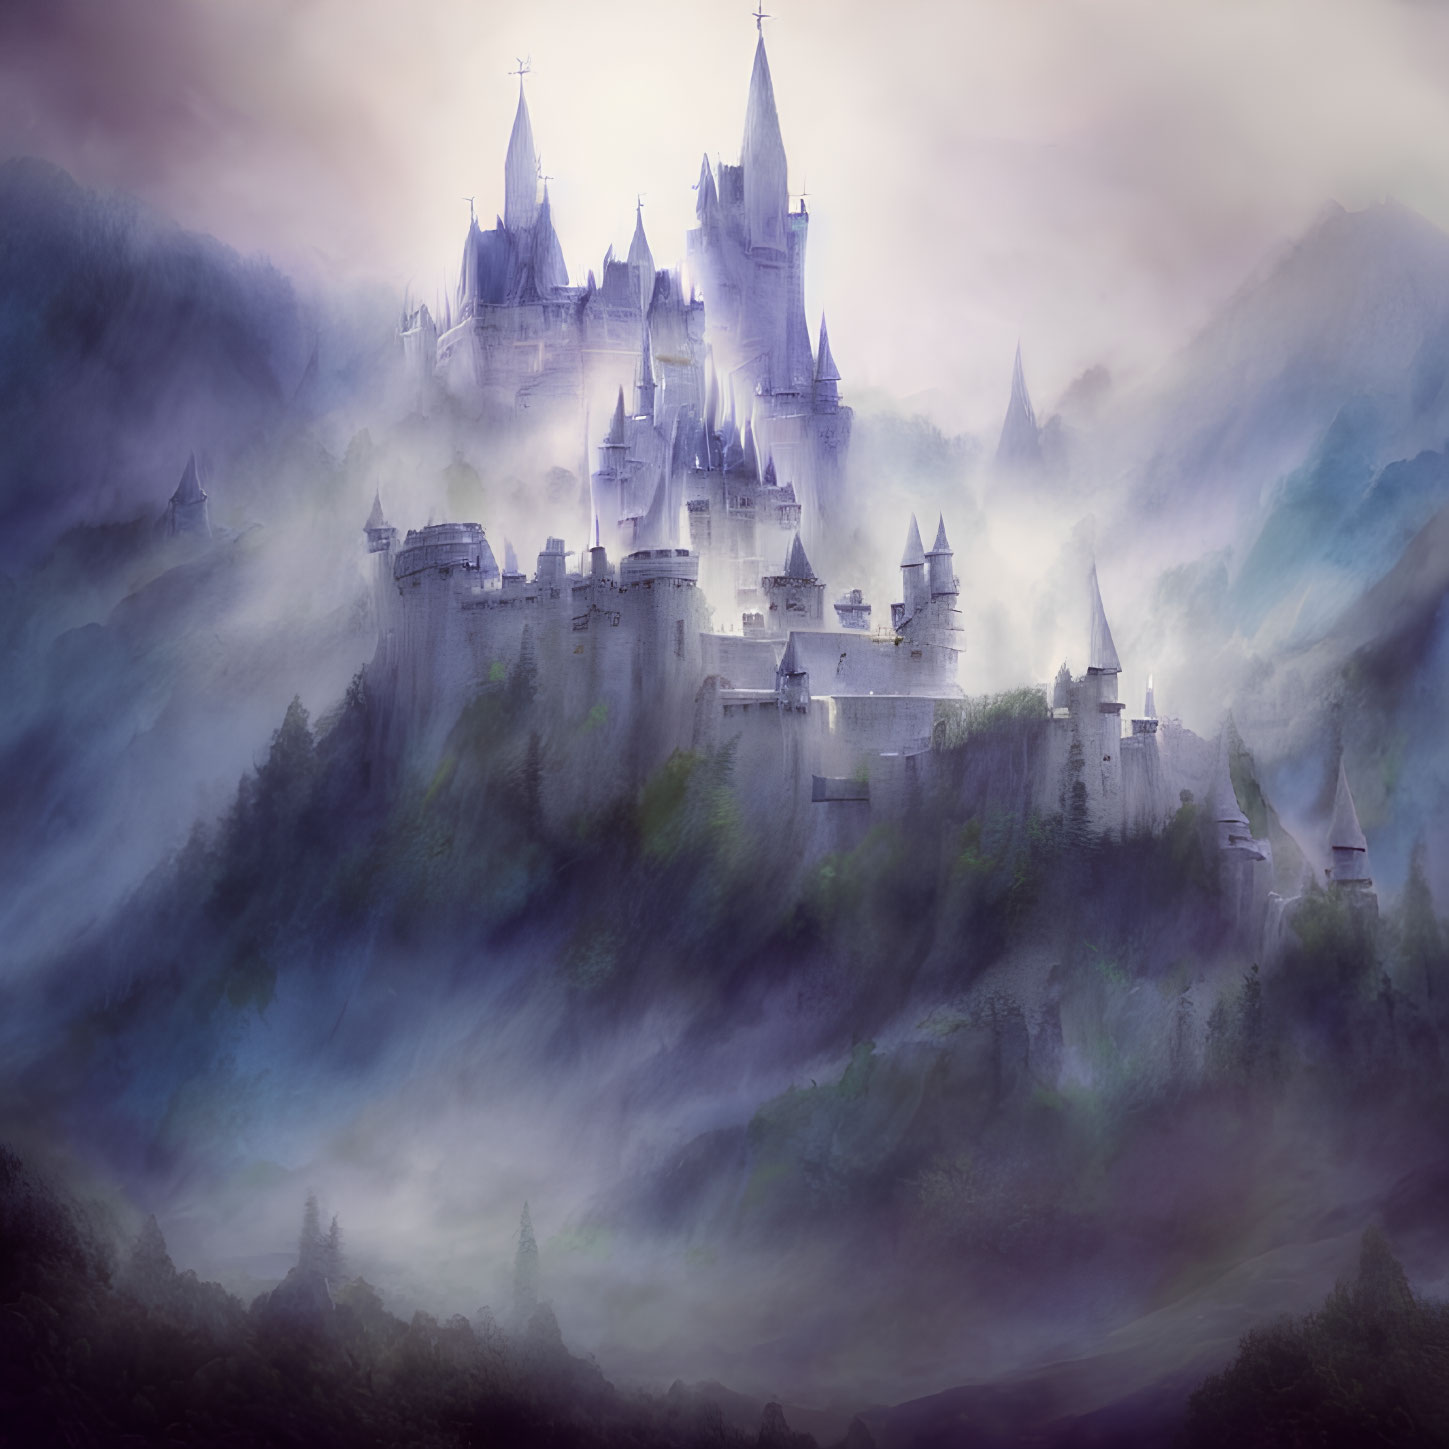 Ethereal castle in mist with spires and forested hills